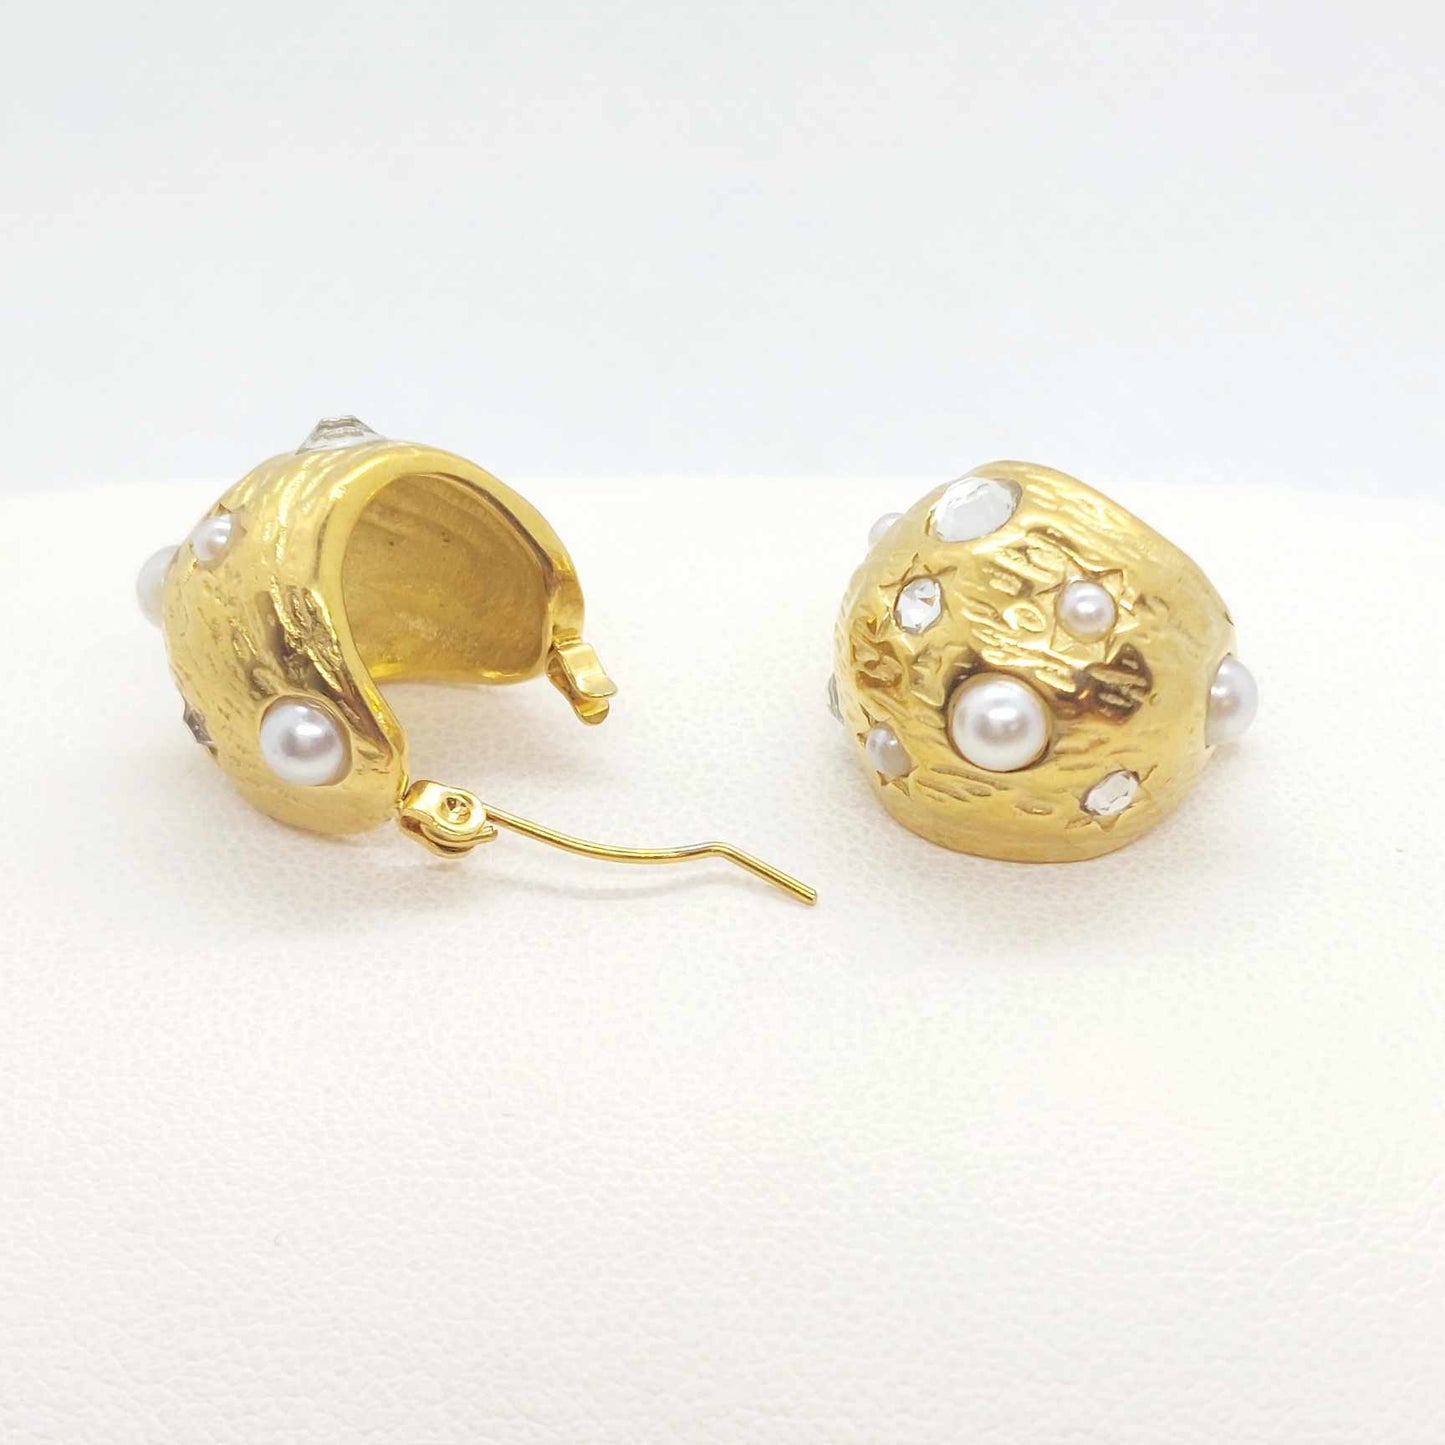 Stainless Steel Vintage Style Earrings Gold Plated